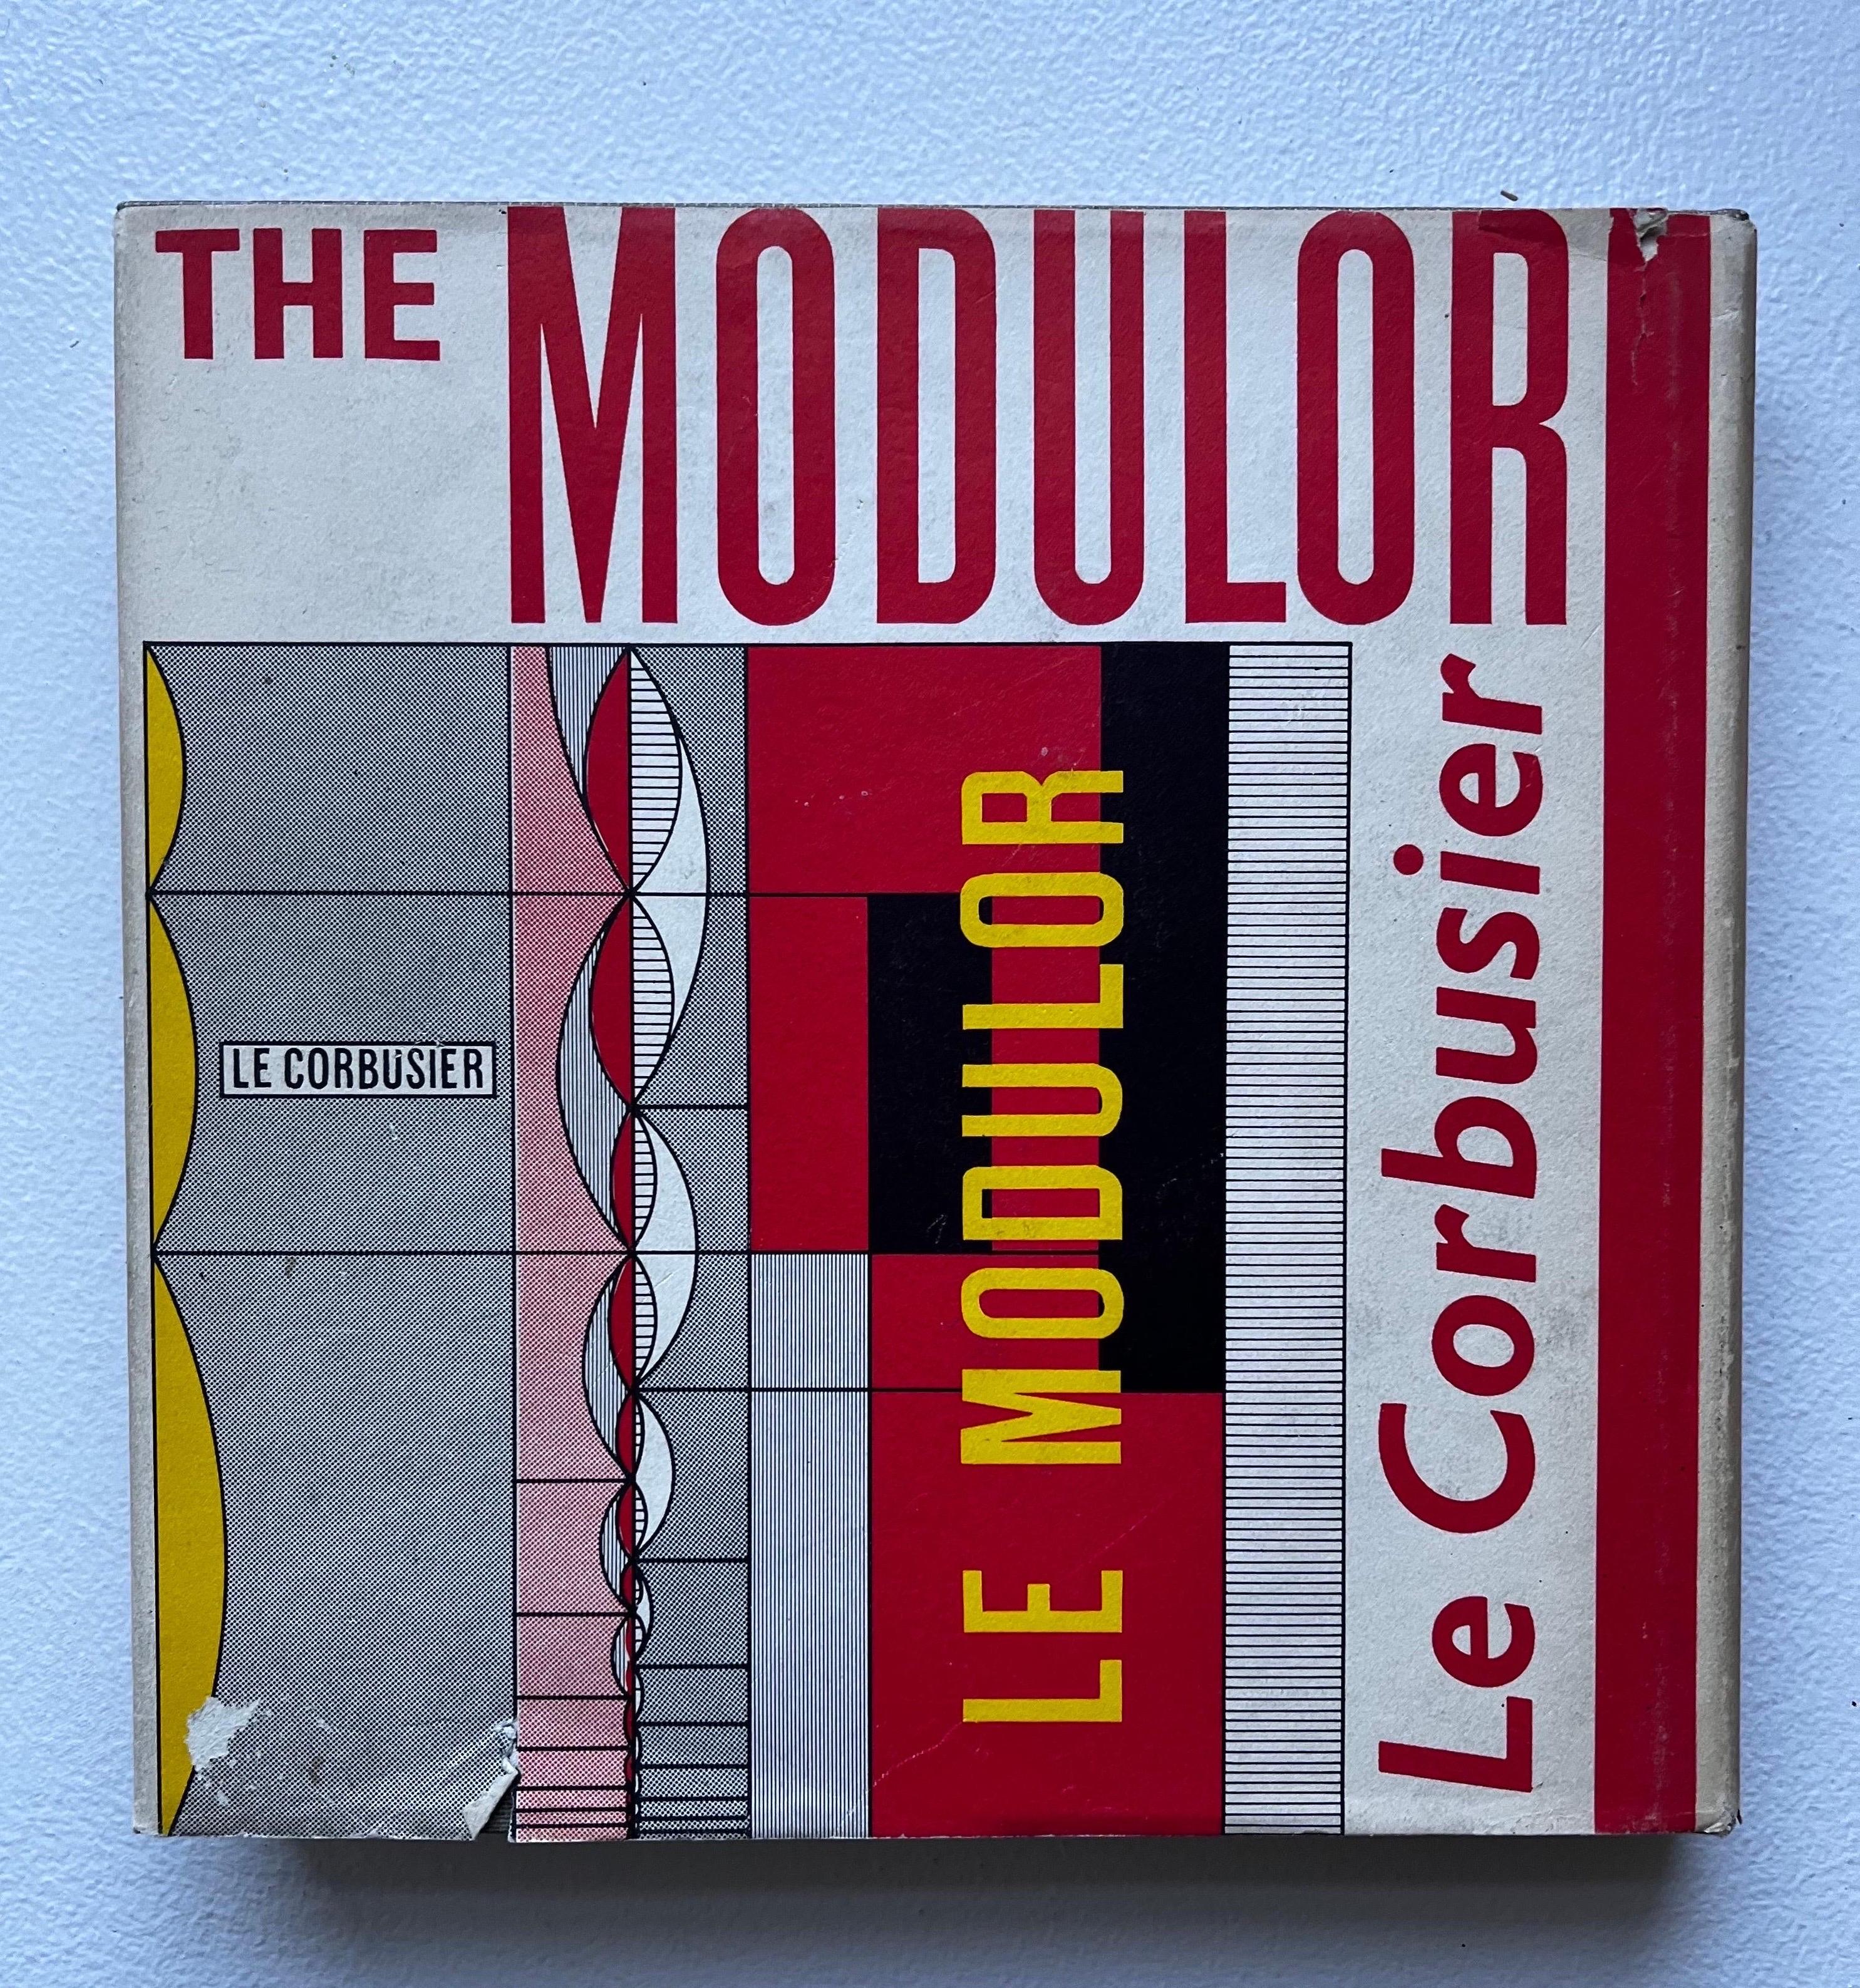 The Modulor - Le Corbusier - third printing - 1954
In overall good condition. 

A classic for all designers and lovers of design.